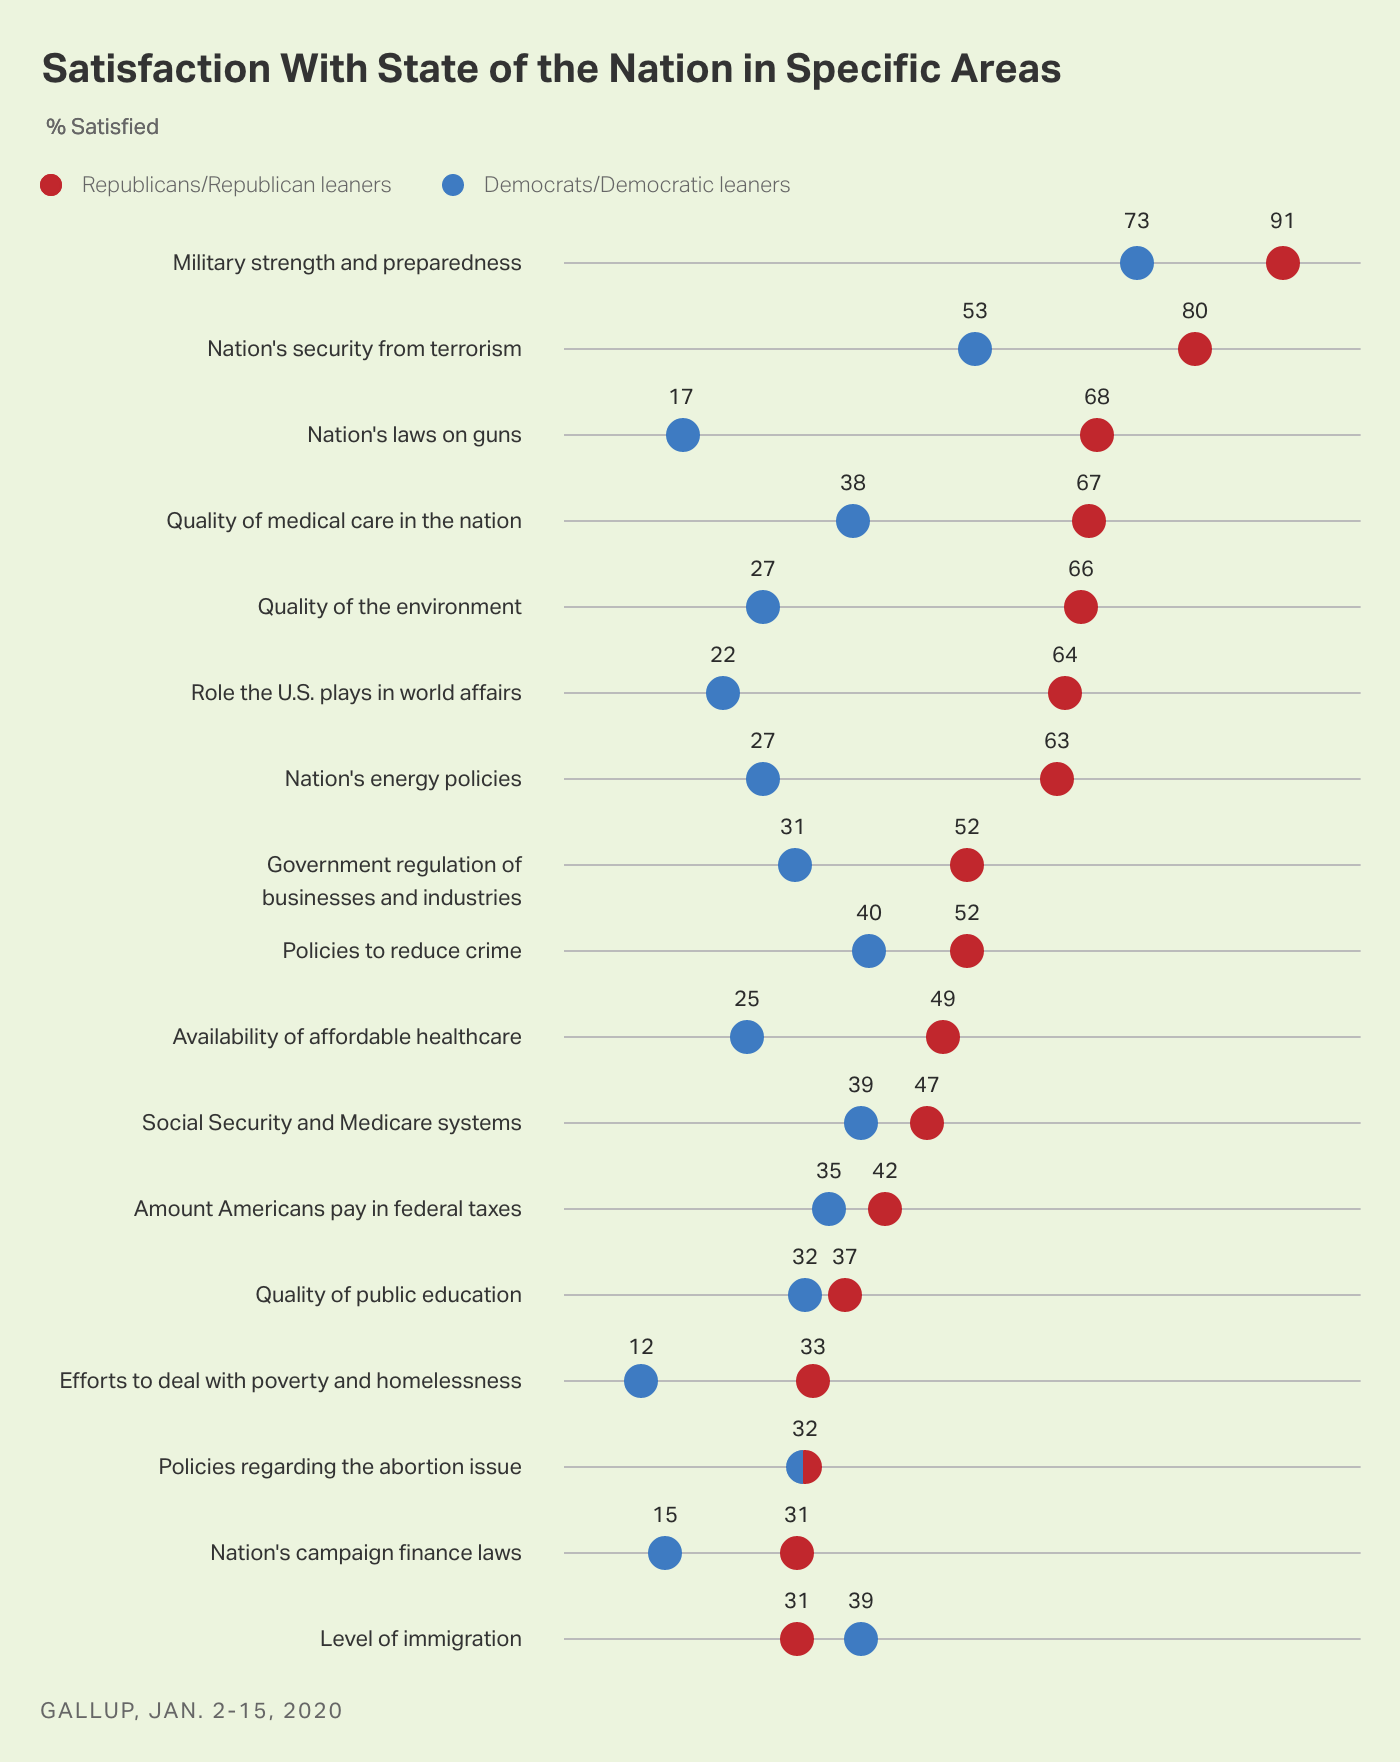 Chart showing percentages of Republicans and Democrats satisfied with each of 17 specific issues facing the country.